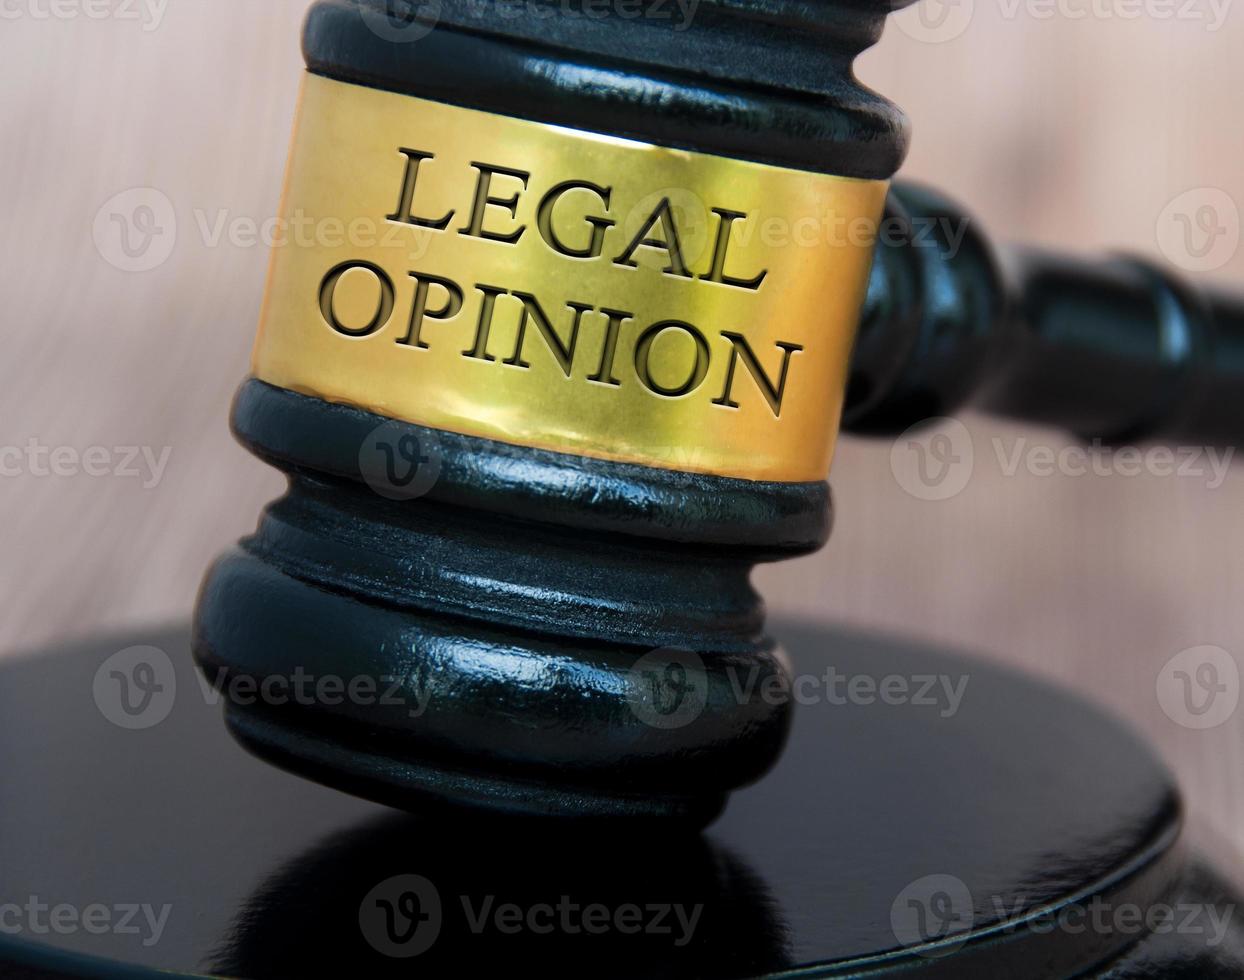 Legal opinion text engraved on lawyer gavel with blurred wooden background. Legal and law concept photo